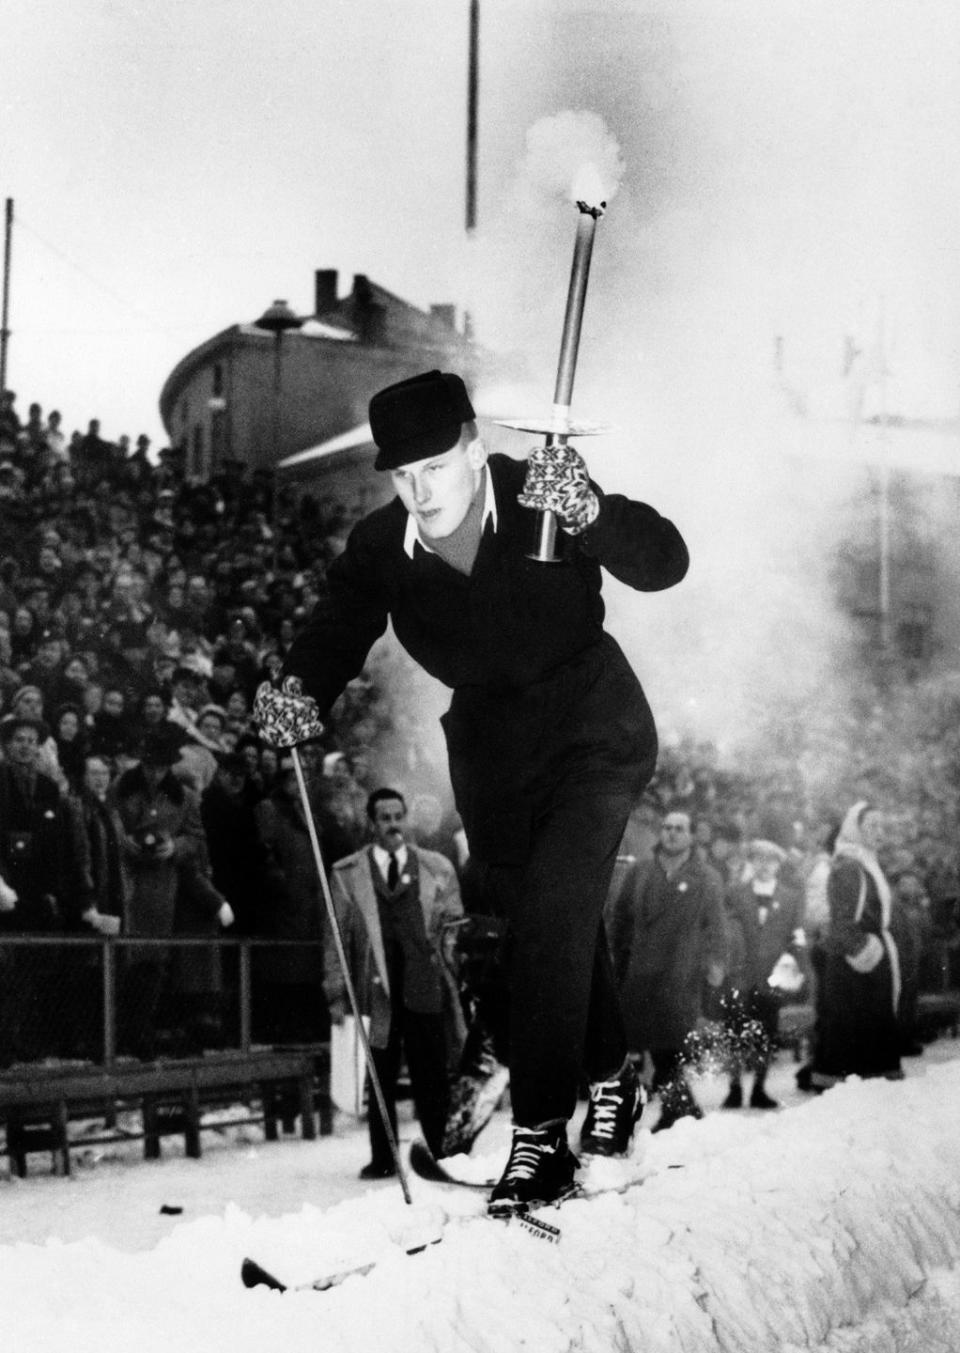 <p>The grandson of Norwegian explorer Fridtjof Nansen arrives in Oslo during the Winter Olympics in 1952 to deliver the Olympic flame. Months prior to the start of the games, the Olympic flame is first lit in Olympia, Greece. </p>